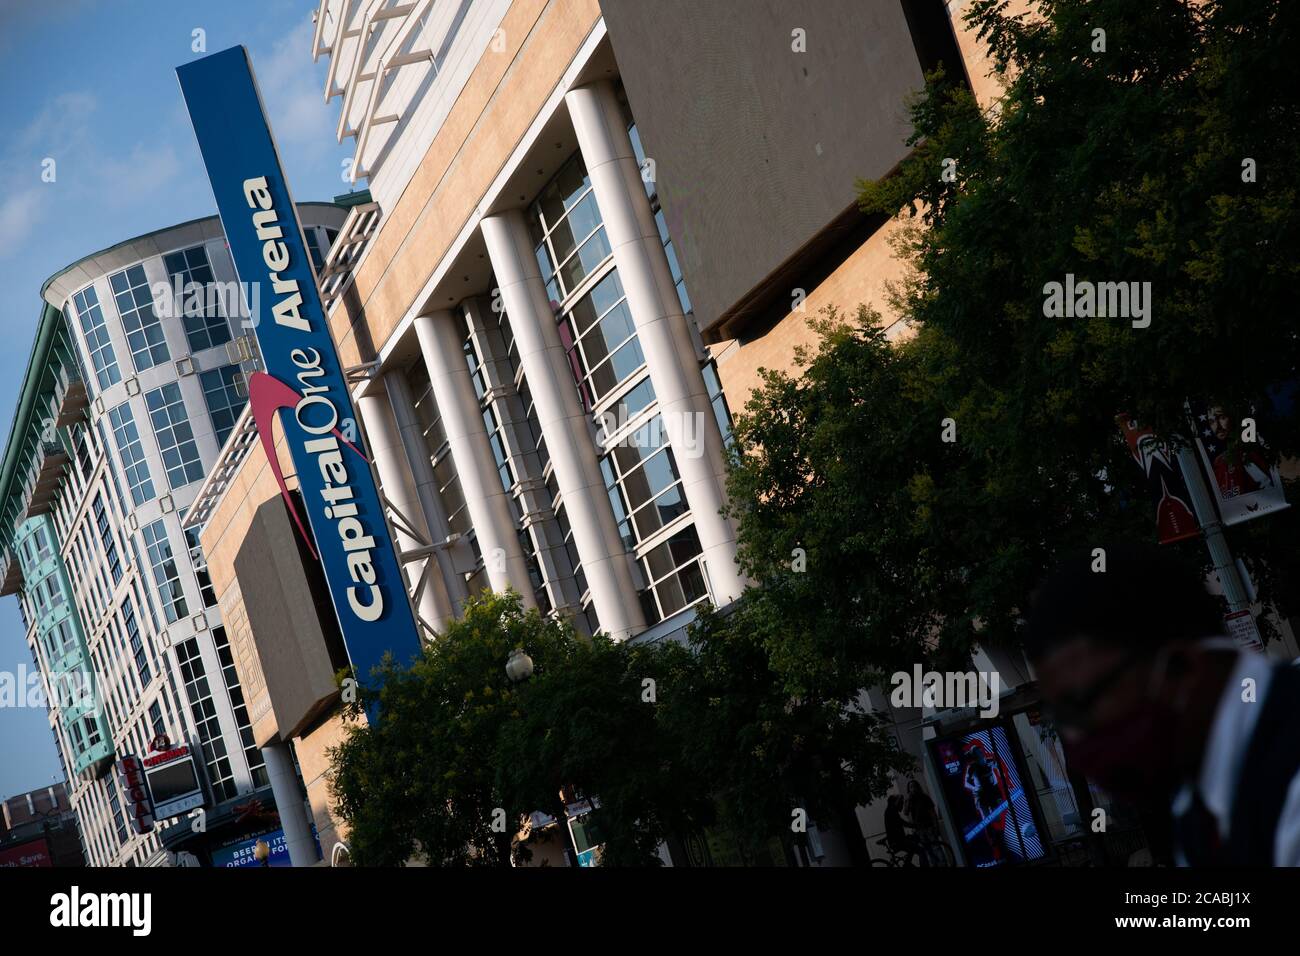 Entrance to the Capital One Arena, the popular indoor sports arena and  venue located in downtown Washington, D.C Stock Photo - Alamy